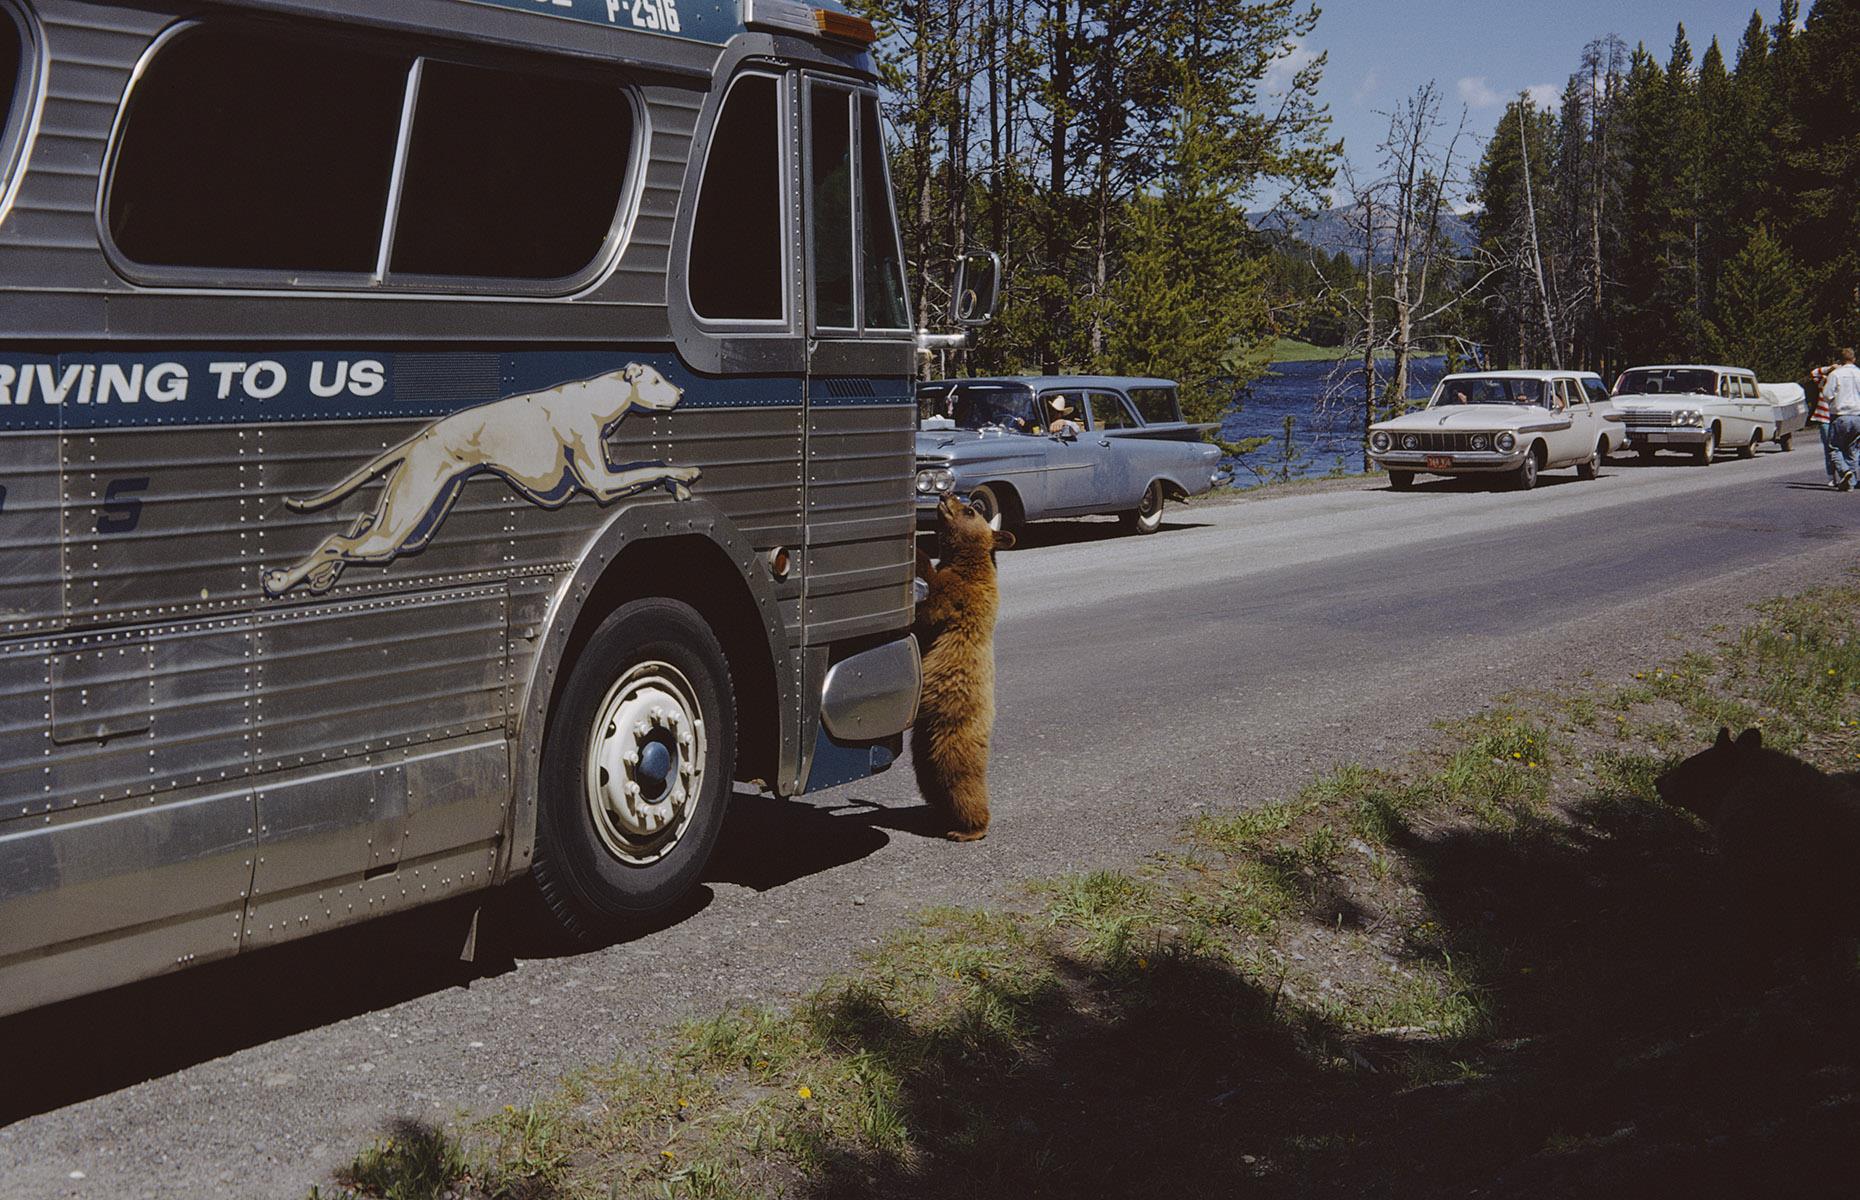 <p>To ease the situation, a comprehensive bear management program was implemented at Yellowstone in 1960. This involved educating visitors on bear safety, including food storage, and prohibiting the feeding of bears in the park. Open-pit garbage dumps were also eventually removed in 1970. This photo of a bear cub investigating a Greyhound bus was taken in 1965. </p>  <p><a href="https://www.loveexploring.com/galleries/105588/beautiful-images-of-the-worlds-bears?page=1"><strong>Check out these beautiful images of the world's bears</strong></a></p>